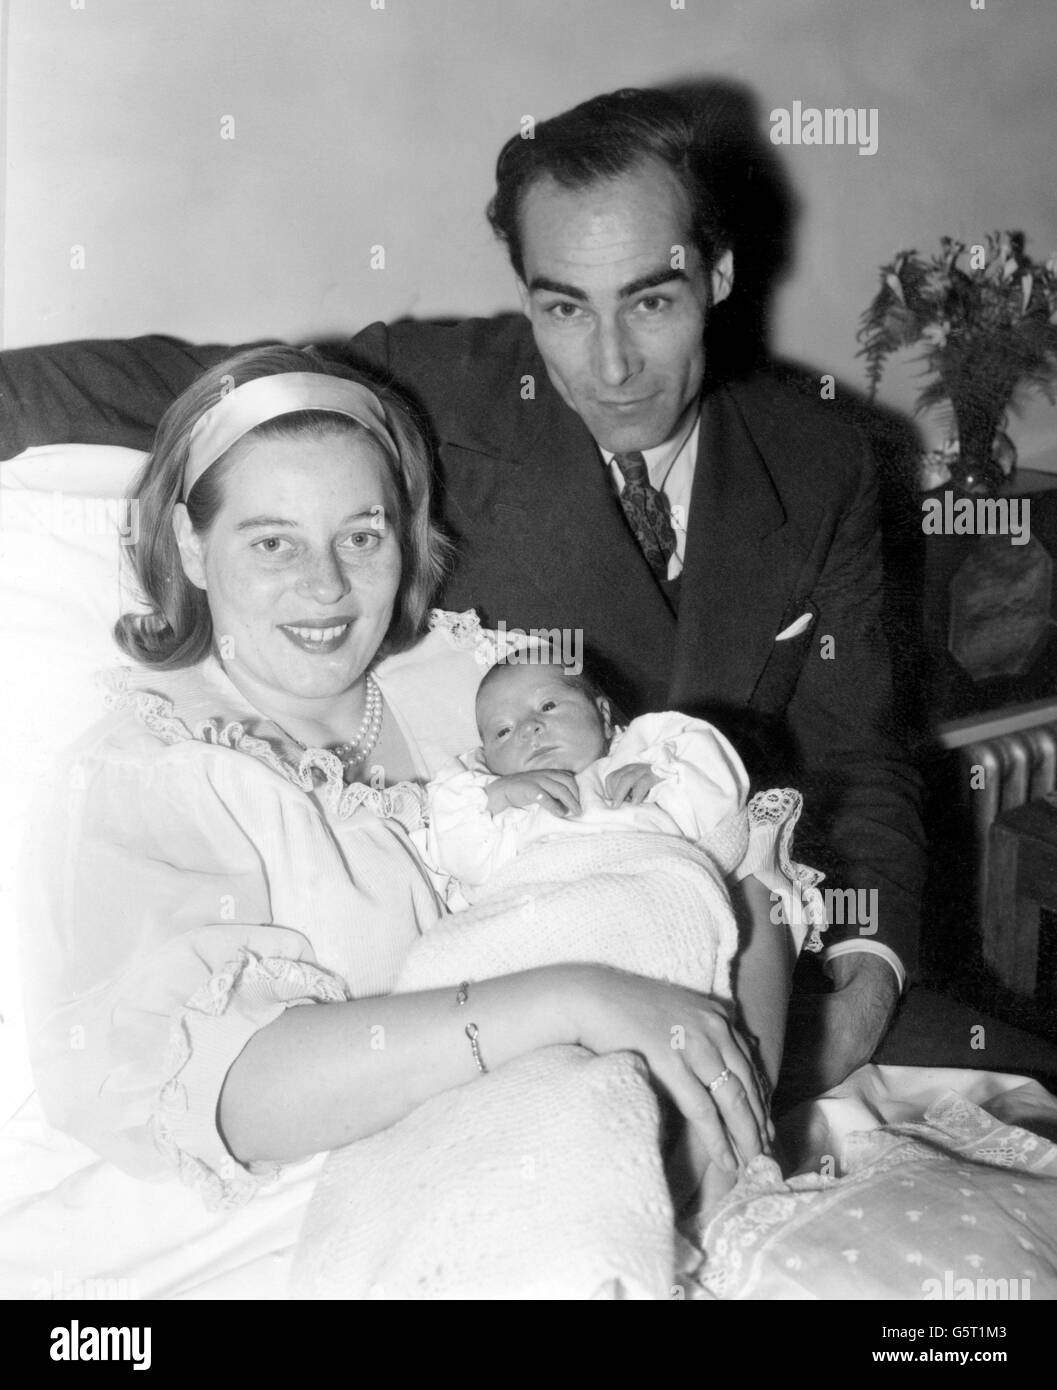 Princess Tomislav of Yugoslavia is pictured with her husband Prince Tomislav of yugoslavia and their baby daughter Princess Katarina at King's College Hospital, Denmark Hill, London, where she was born last Saturday. The Princess, formerly Princess Margarita of Baden, is the niece of the Duke of Edinburgh. The Duke attended her wedding to Prince Tomislav in June 1957 at Salem Castle, near Lake Constance. Stock Photo